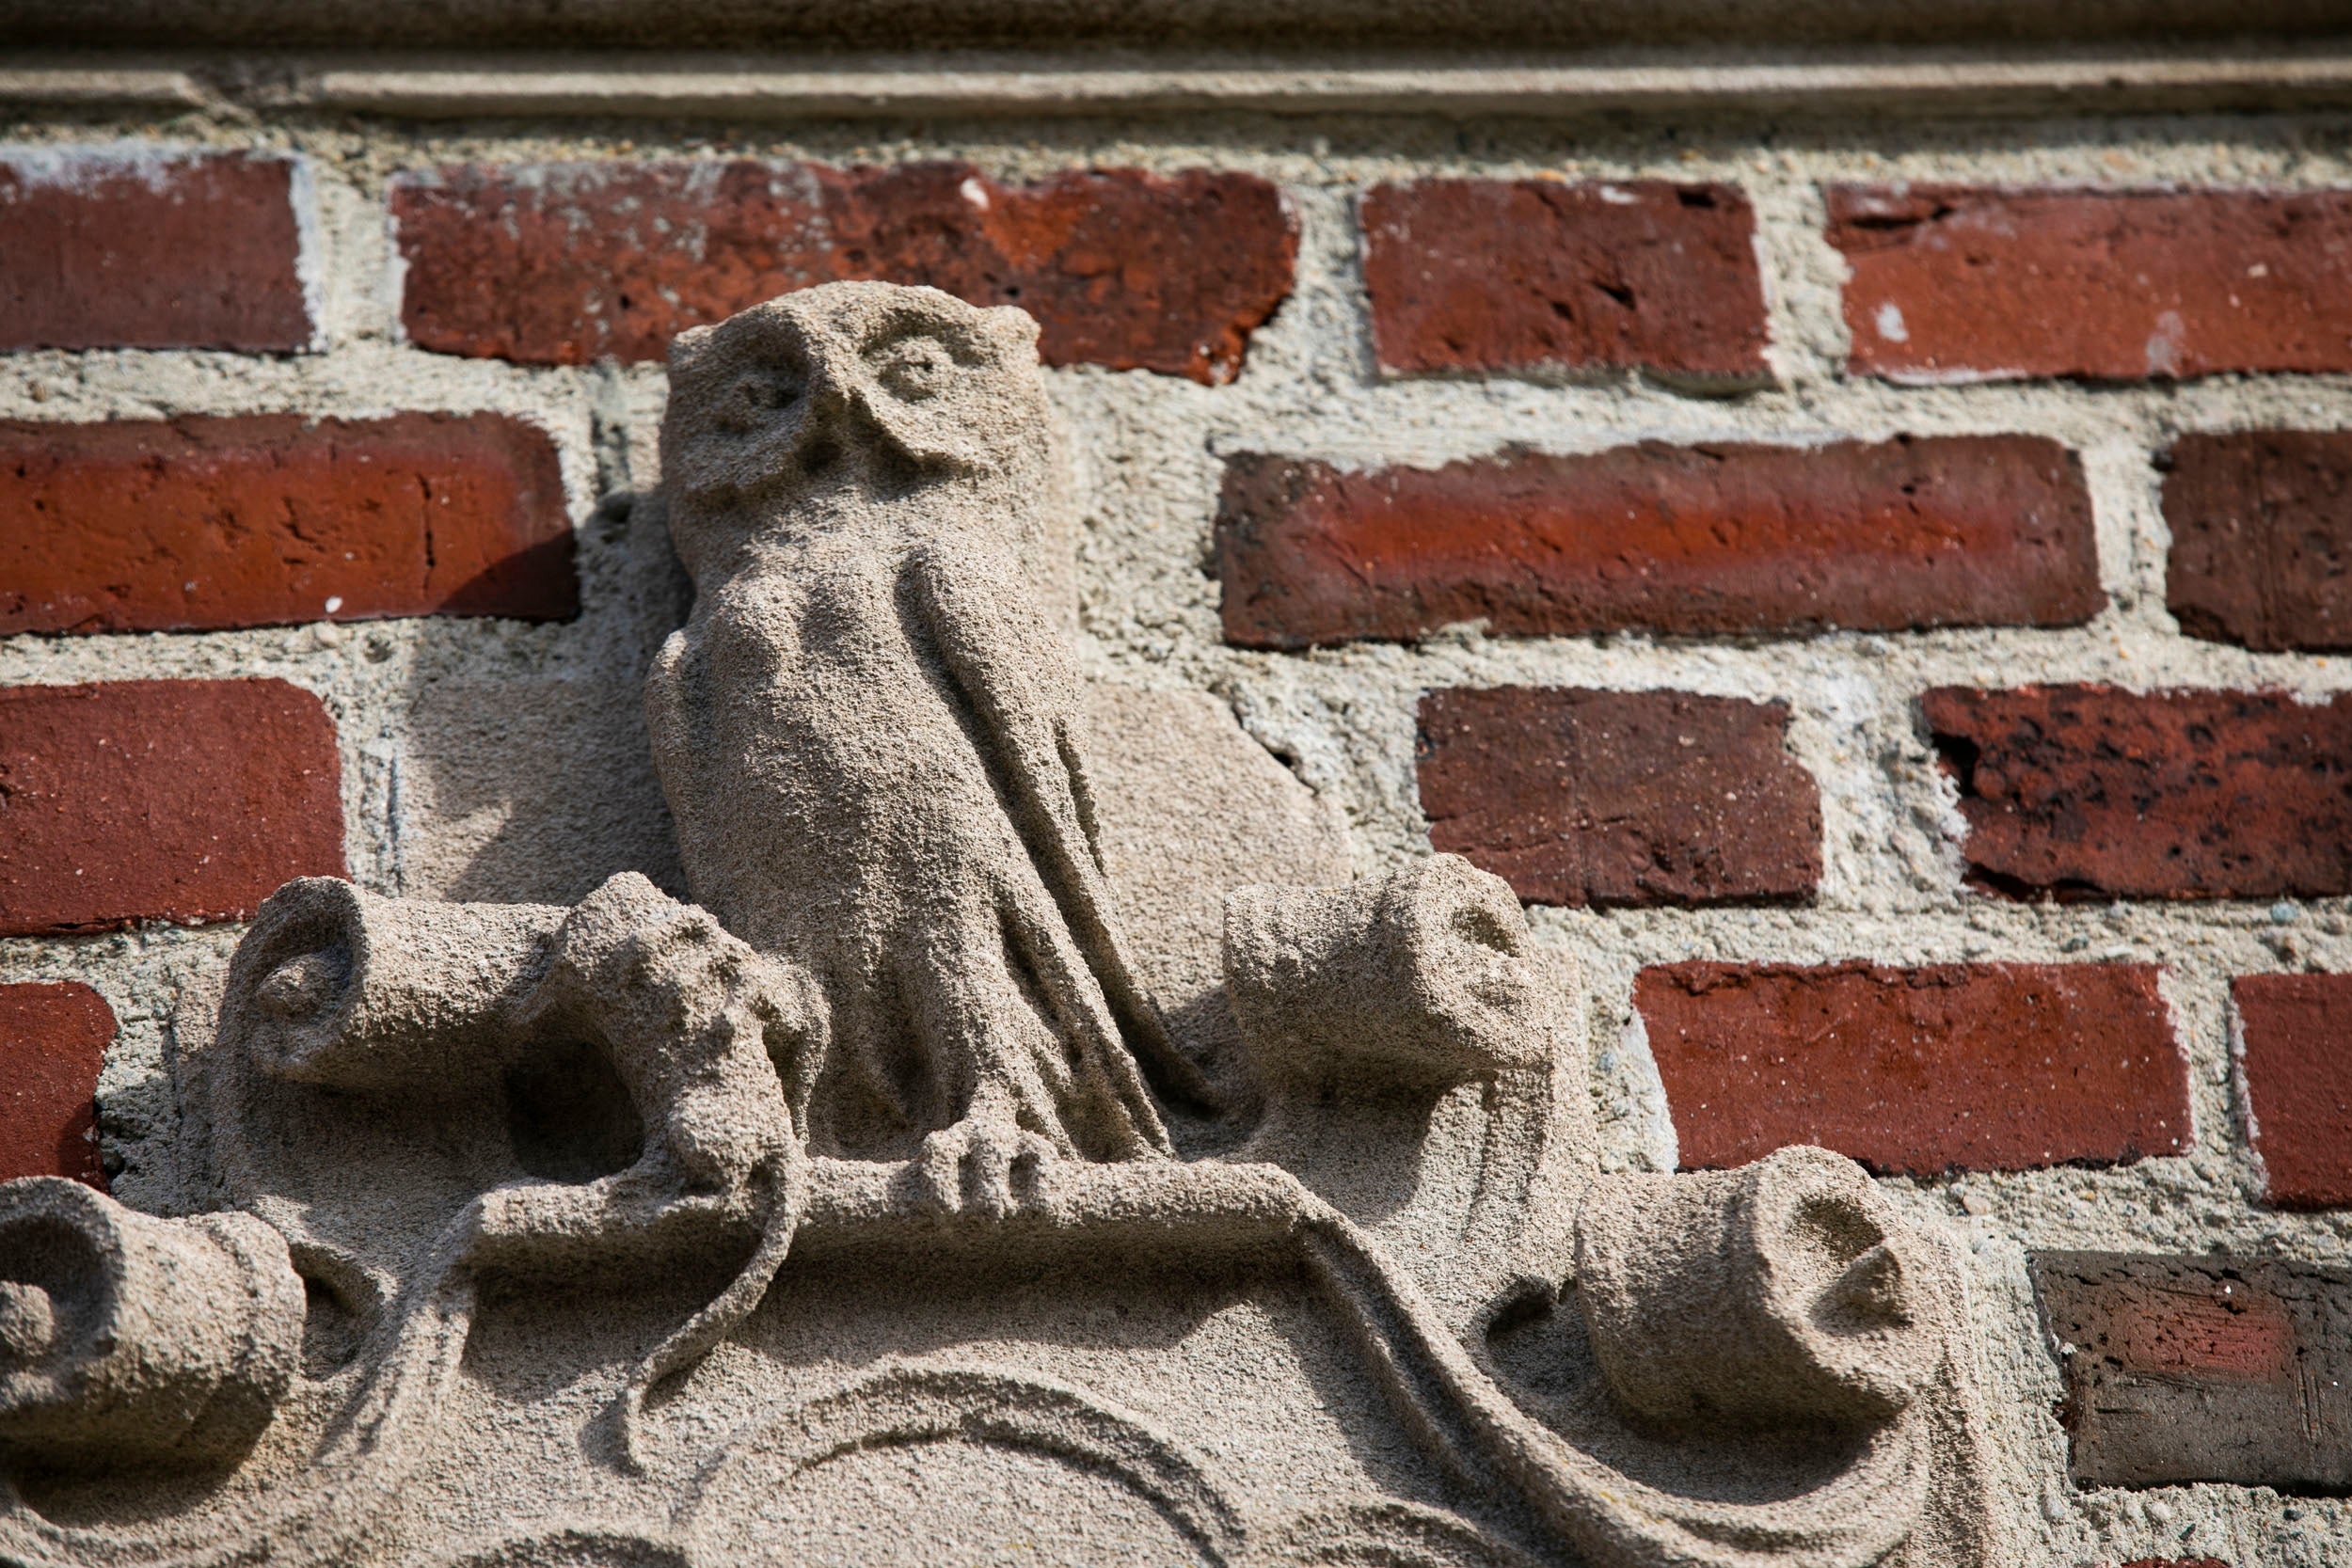 An owl decorates the gate surrounding Winthrop House.